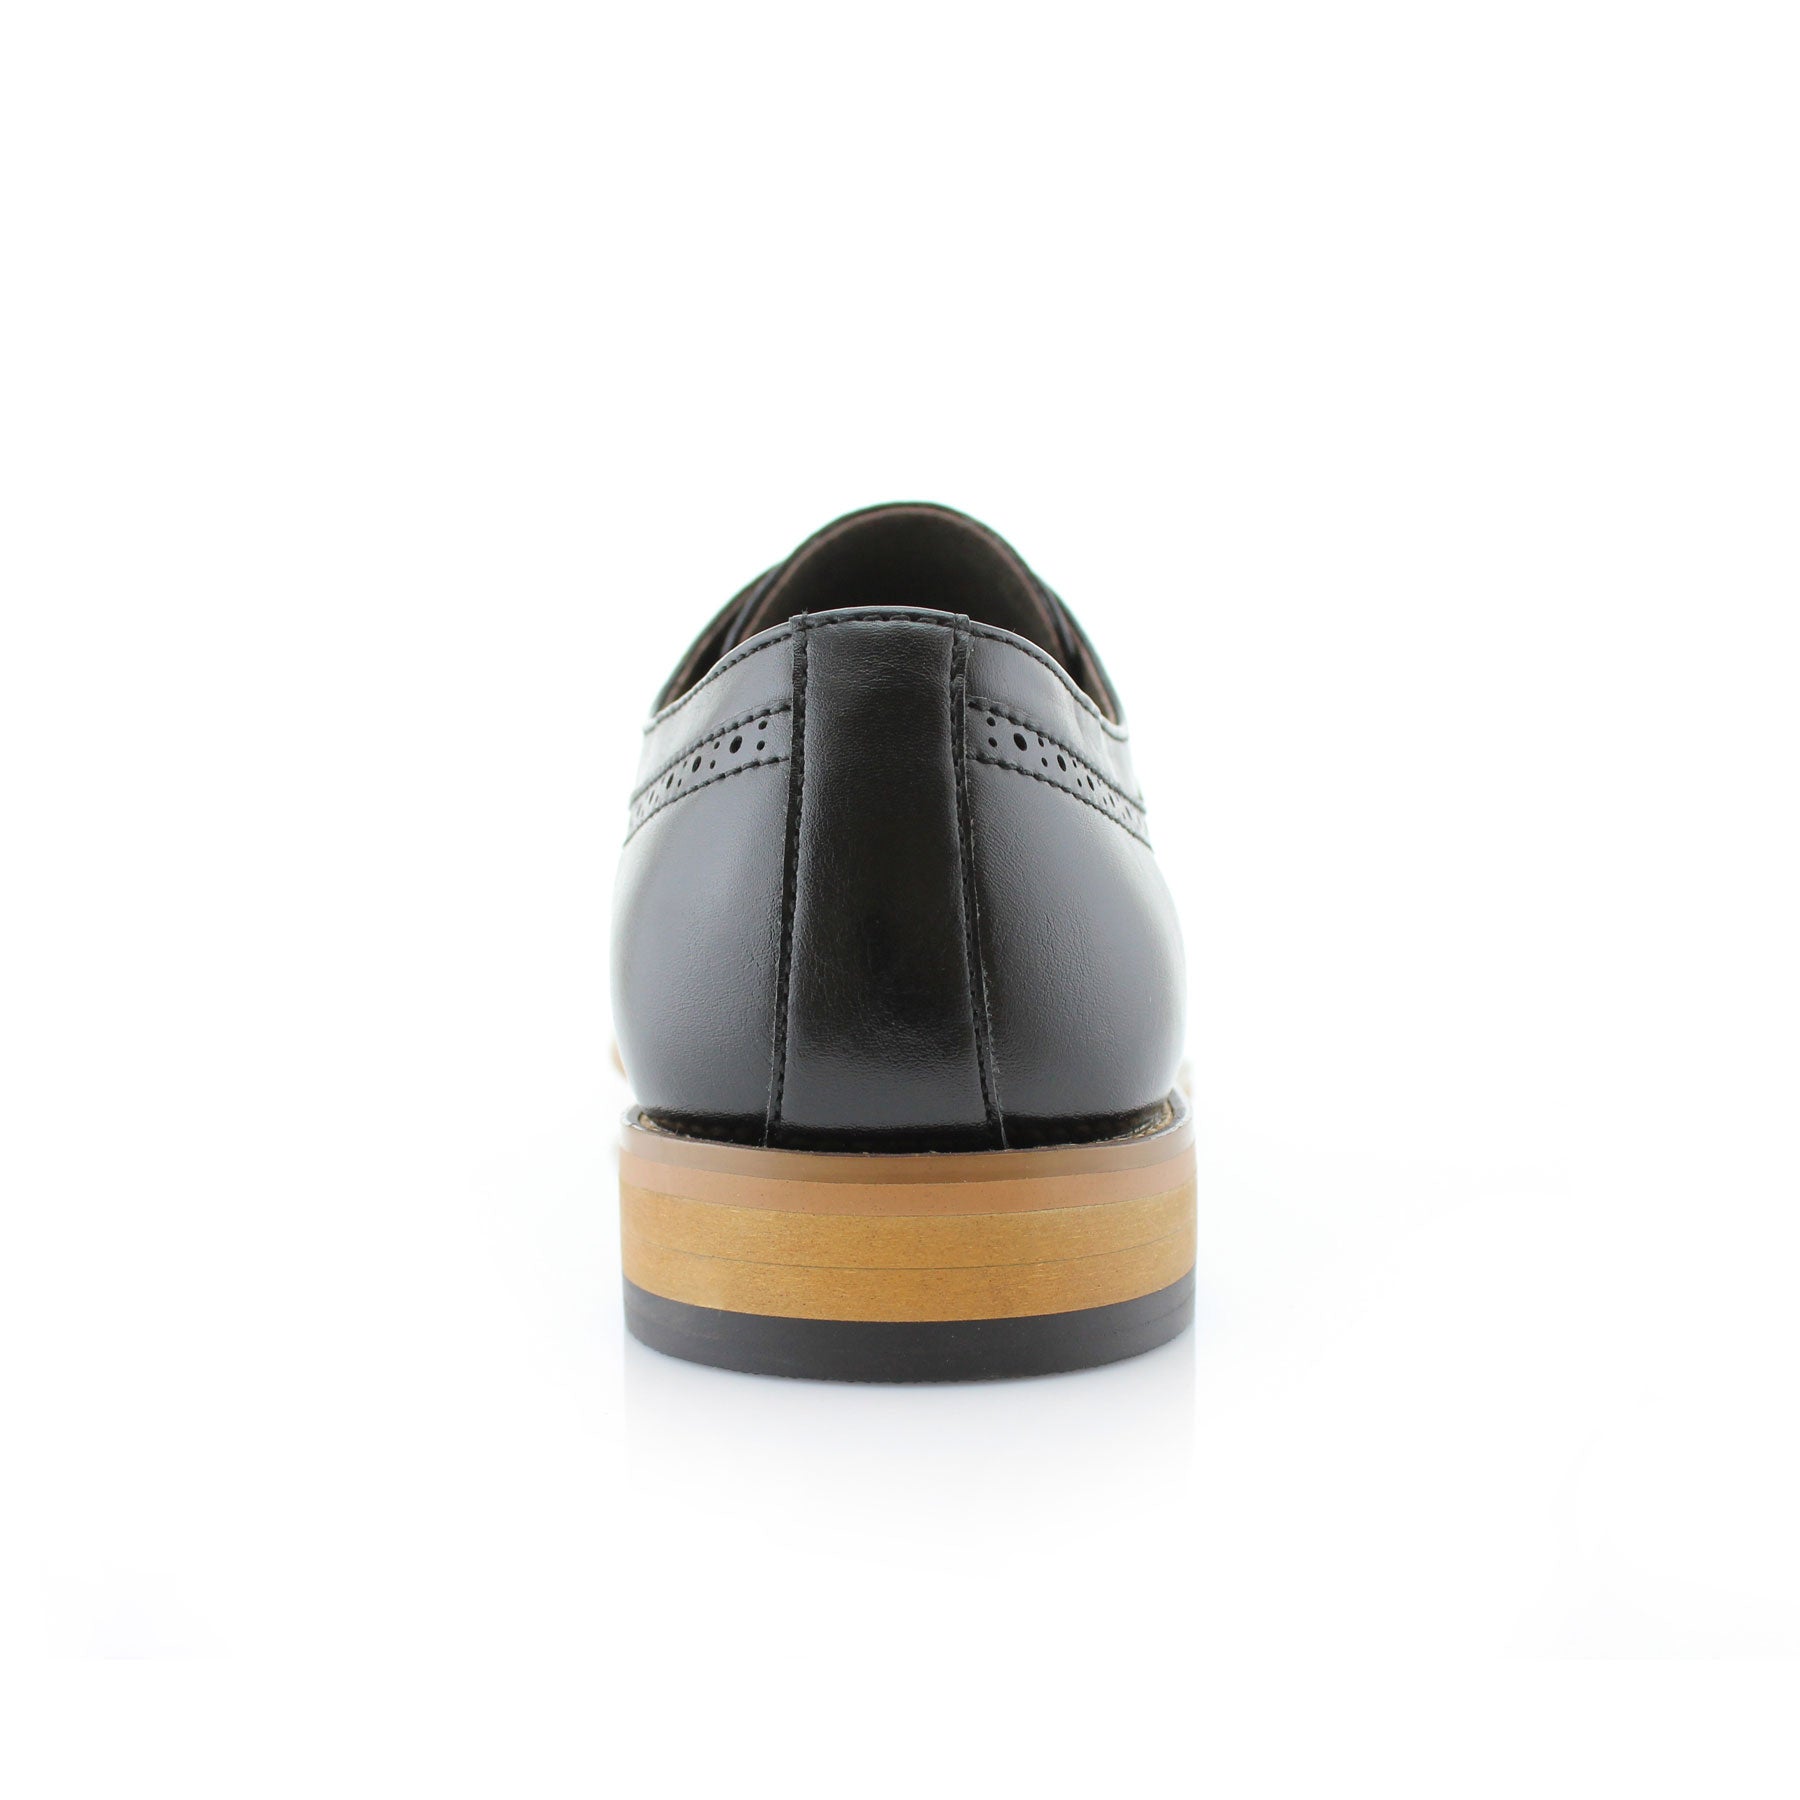 Brogue Burnished Derby Shoes | Jared by Ferro Aldo | Conal Footwear | Back Angle View